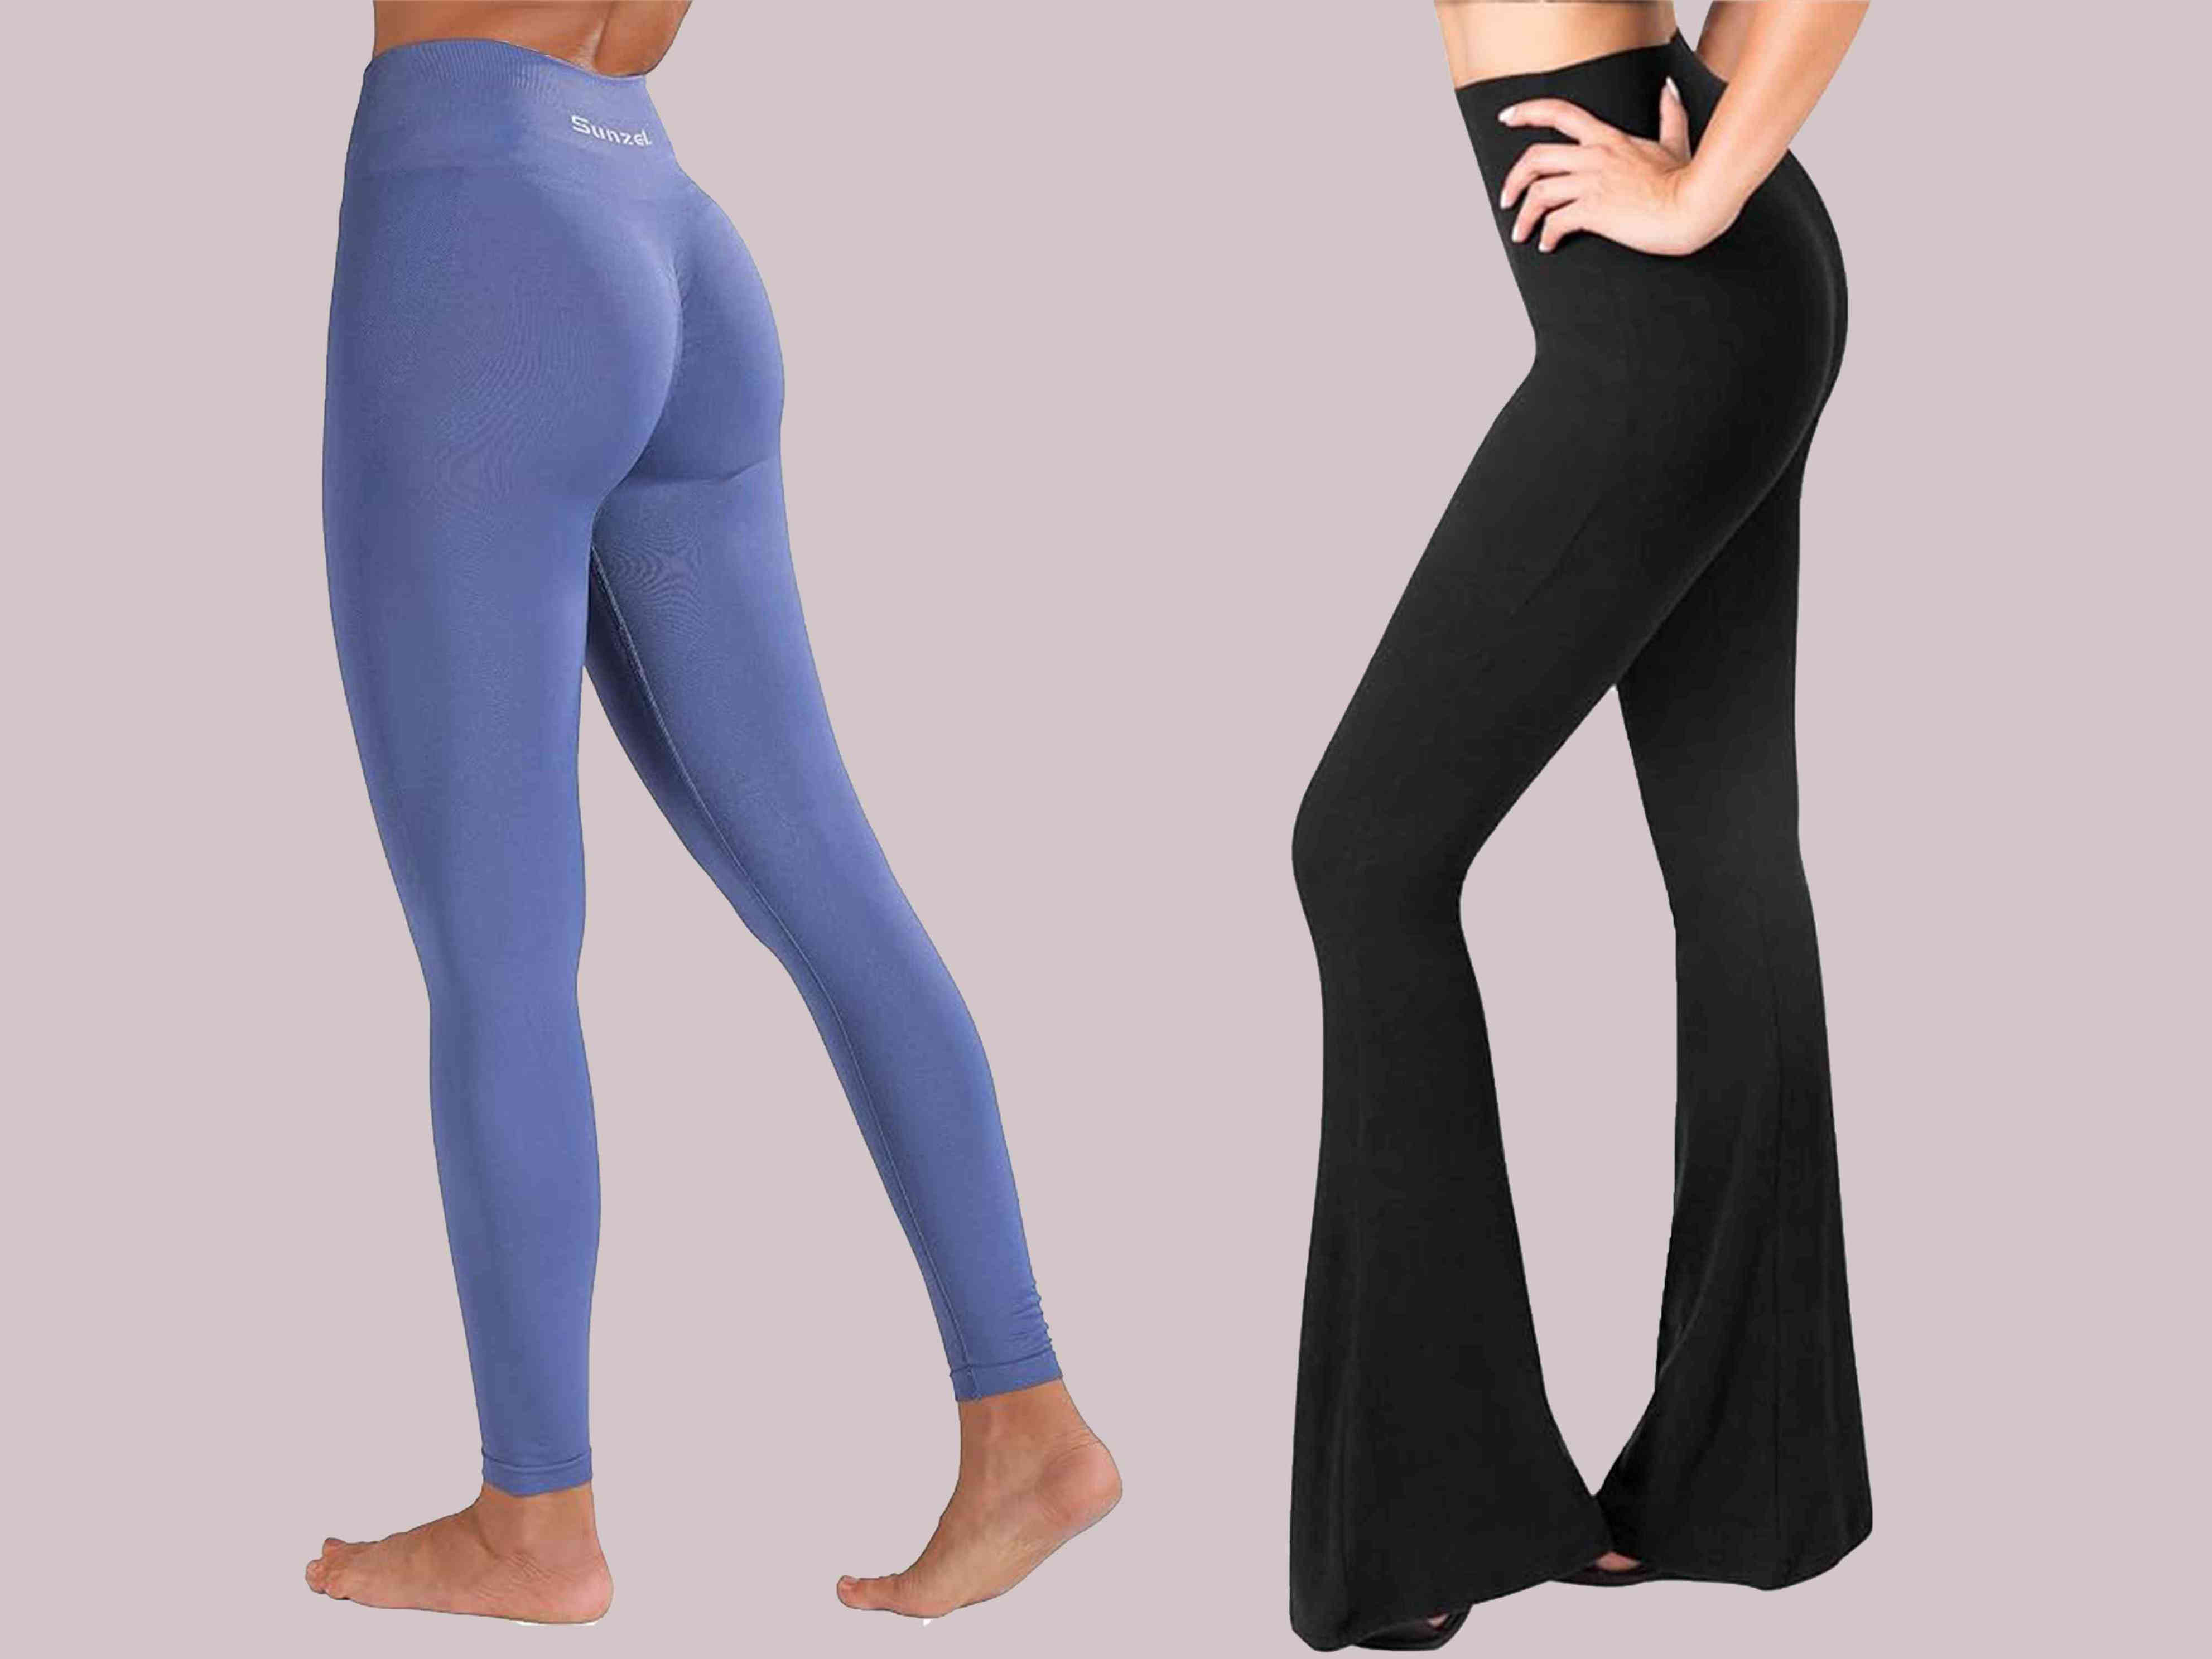 Amazon’s January Sale Includes Under-$20 Leggings That “Make Your Bum ...